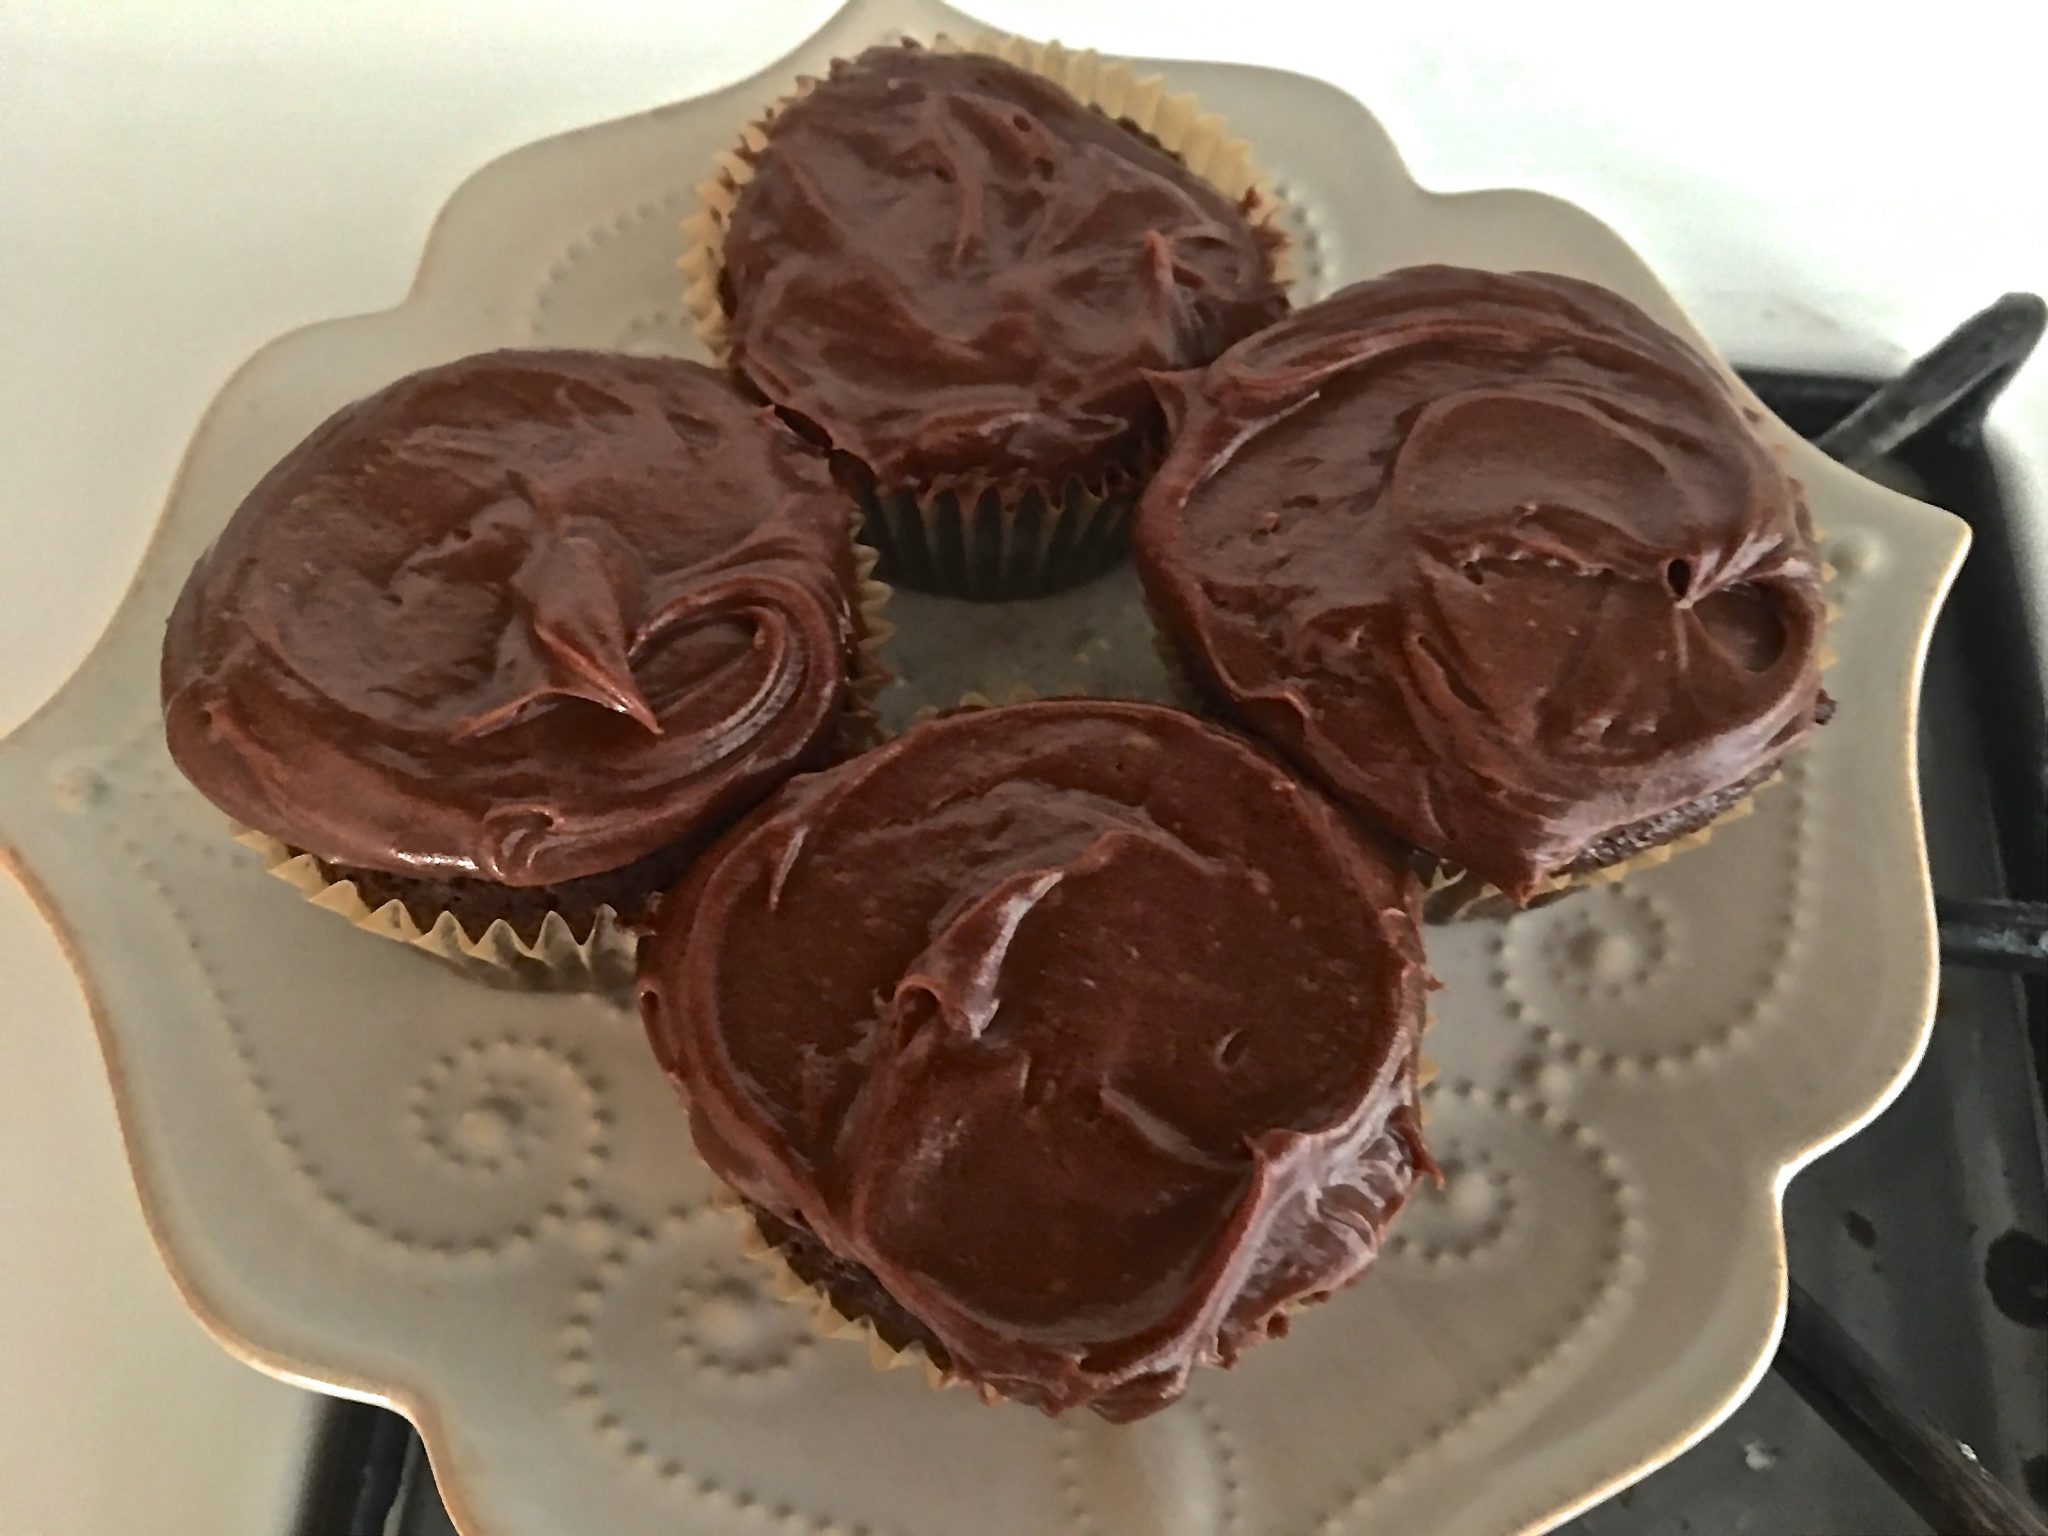 Four rich chocolate iced cupcakes in paper cupcake liners on white plate with raised curlycue design